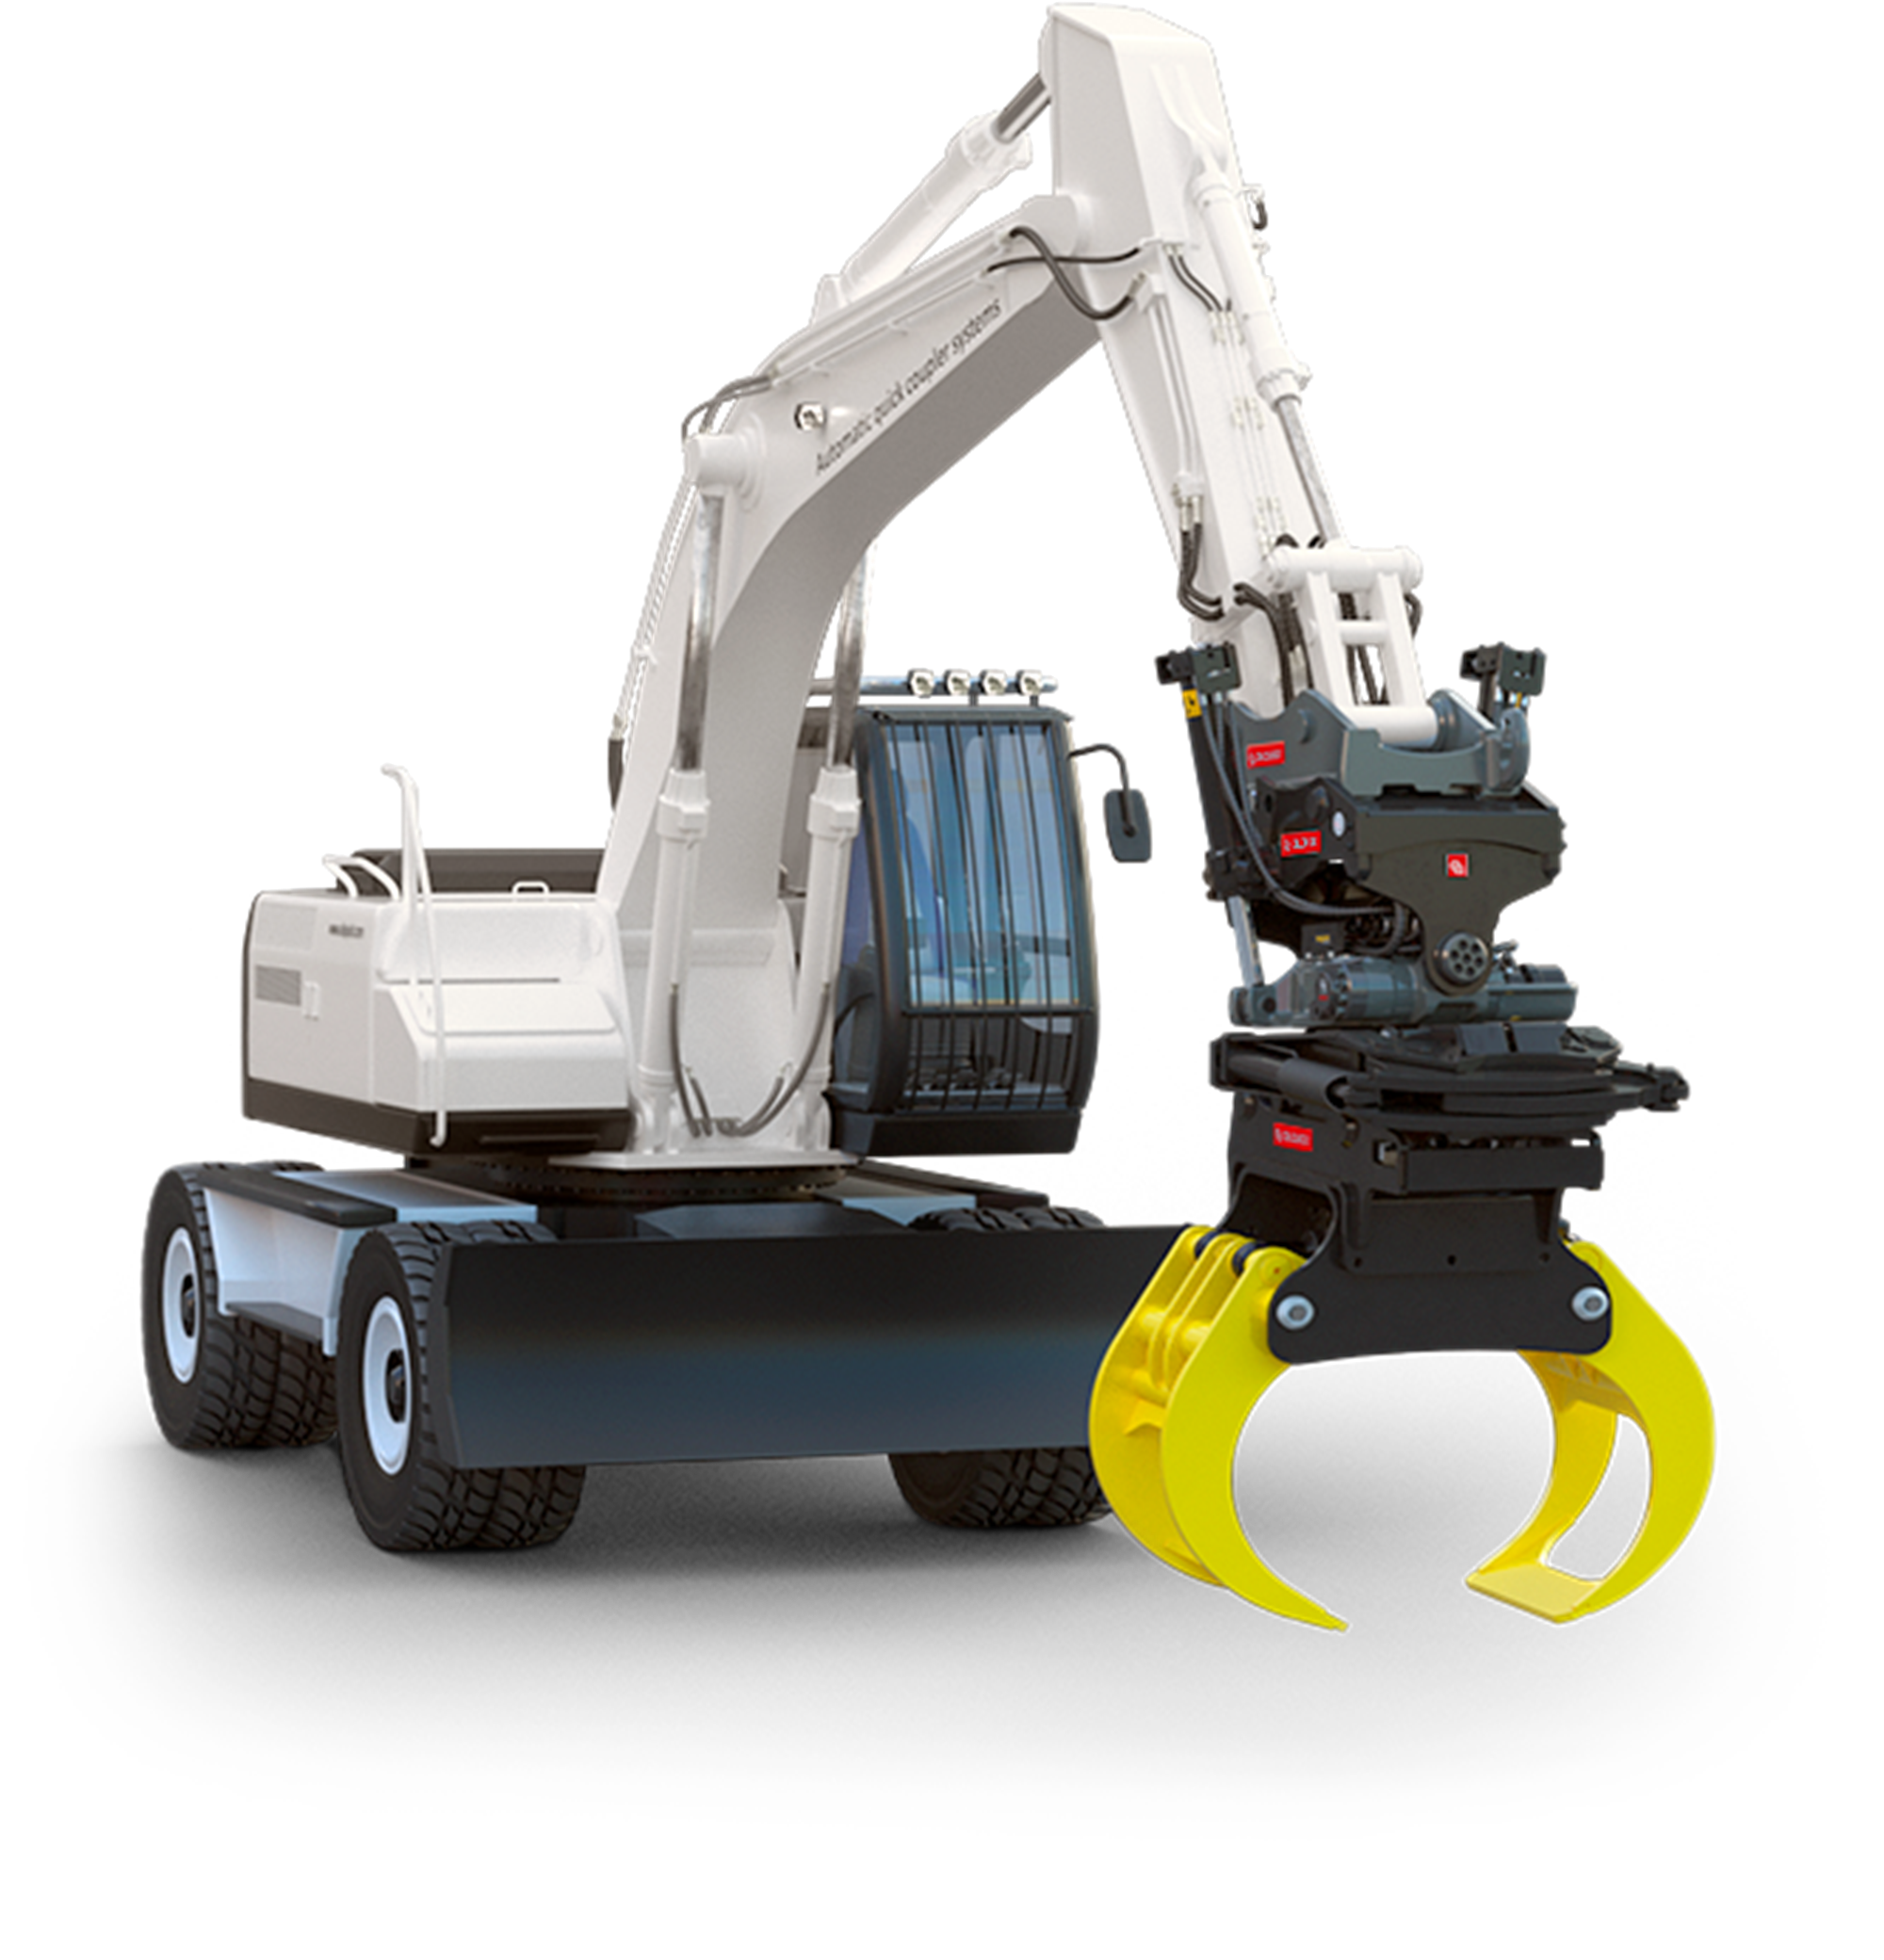 OIlquick OQTR Automatic quick coupler system for Tilt Rotators | APRD Machinery Ireland